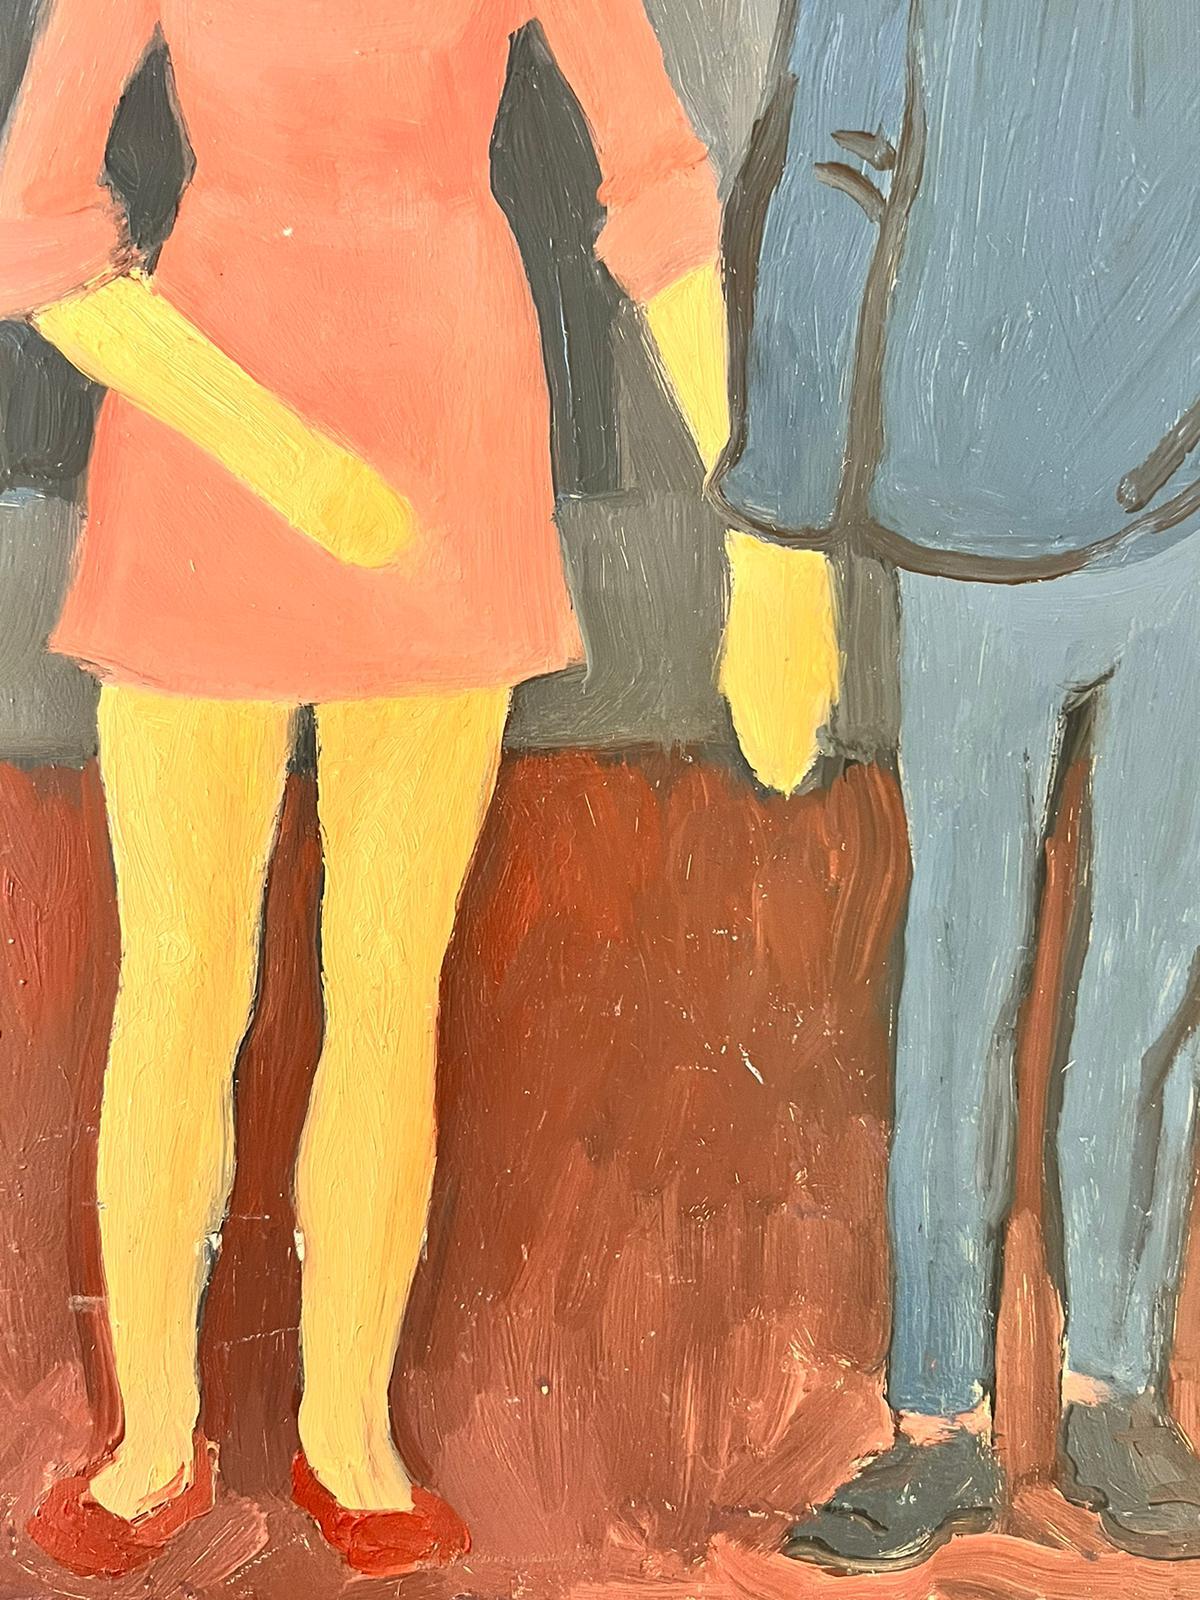 Artist/ School: French School, mid 20th century

Title: The Fashionable Couple

Medium: oil on board

Size: 13 x 9.5 inches

Provenance: private collection, France

Condition: The painting is in overall very good and sound condition.
 